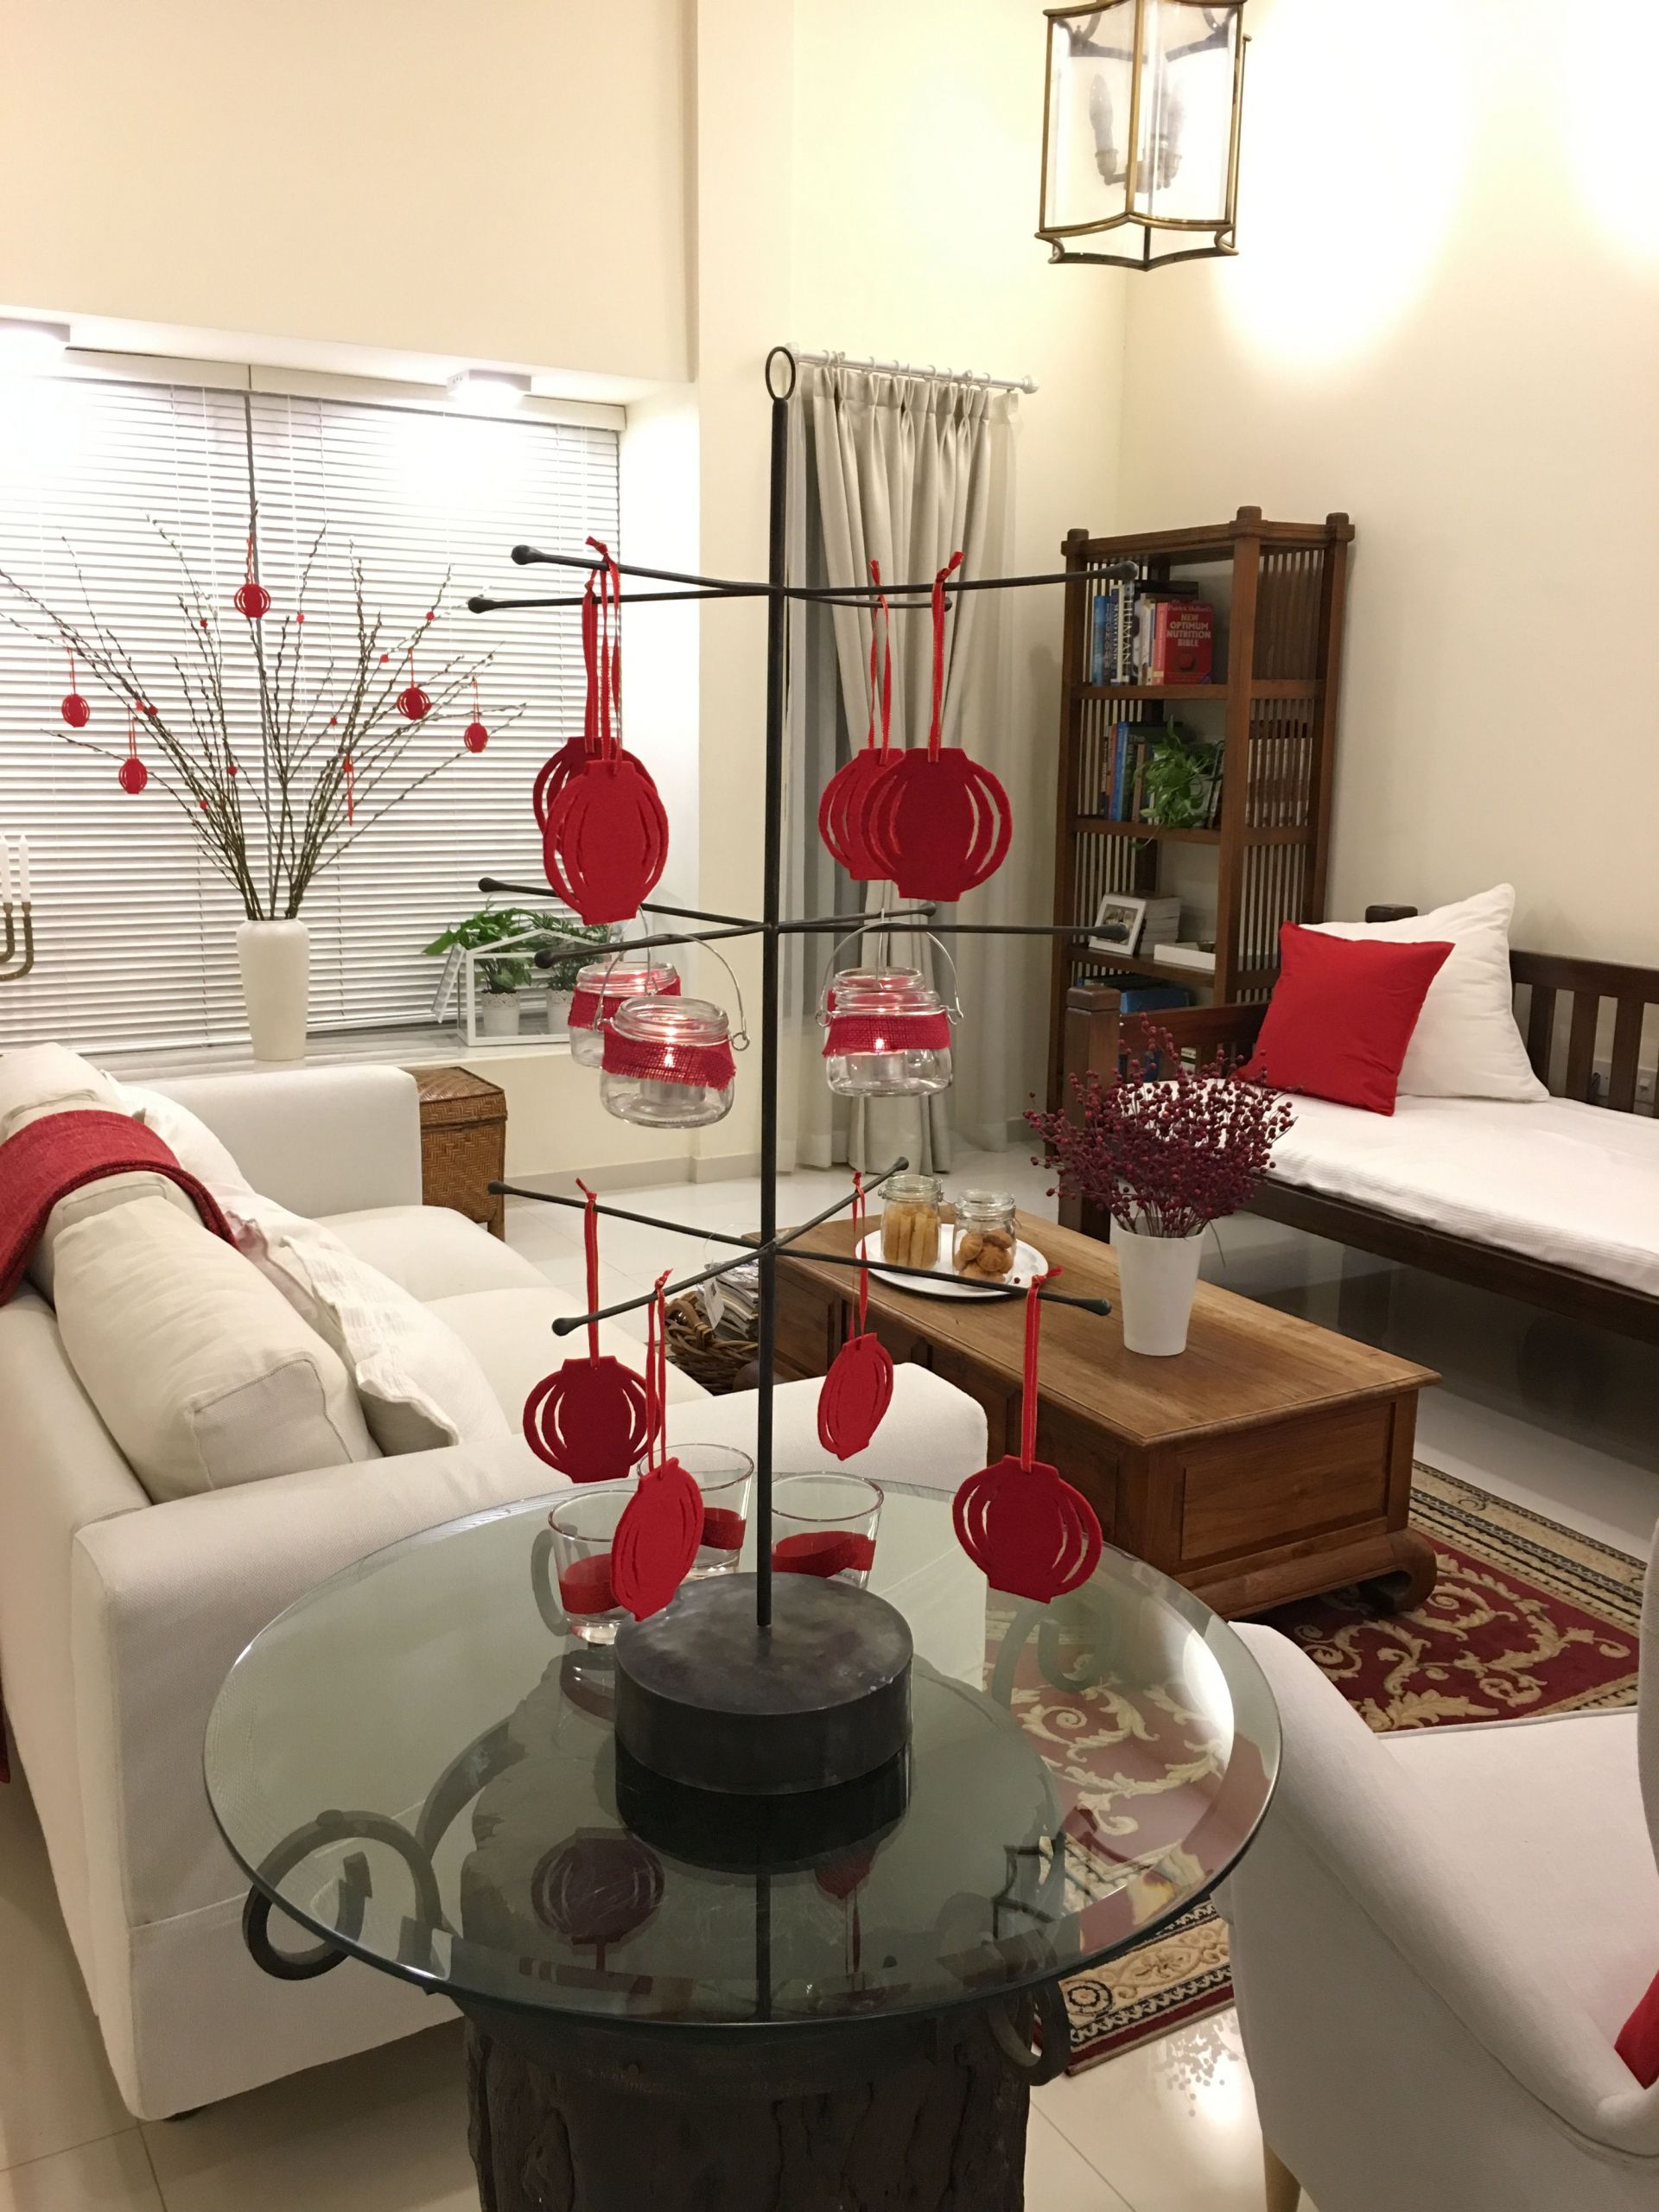 Chinese New Year Decor Ideas
 Chinese New Year Decor Ideas from Ashley s Living